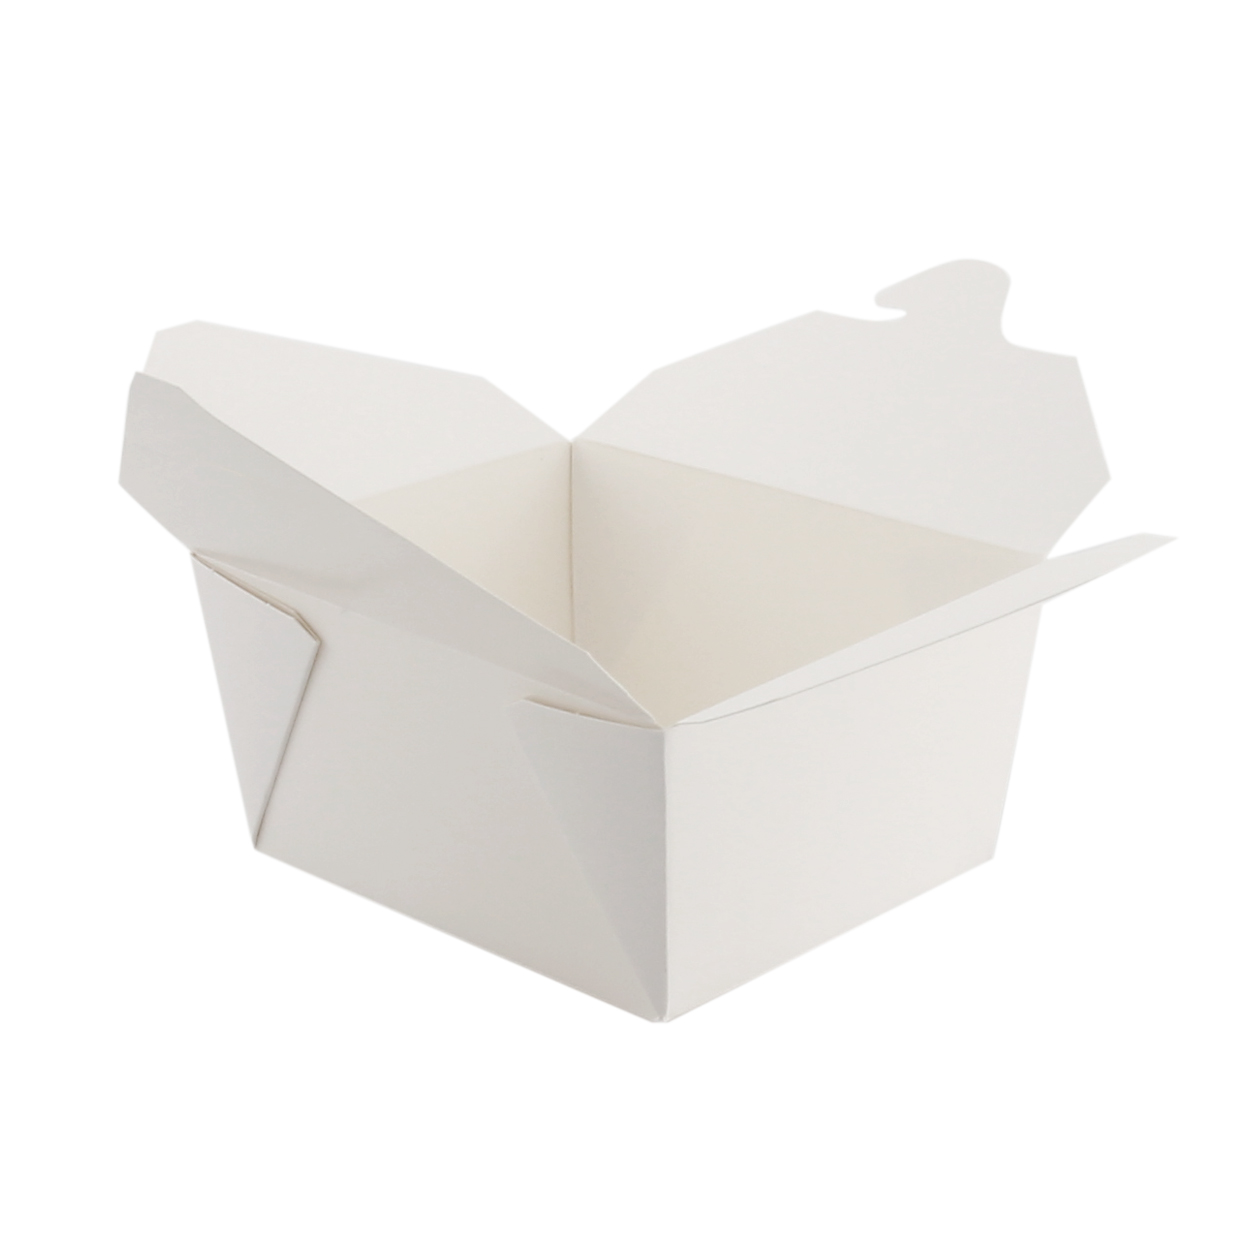 26oz  Microwavable folded paper take-out container  51/8" x4 13/64" x 2 19/32" 